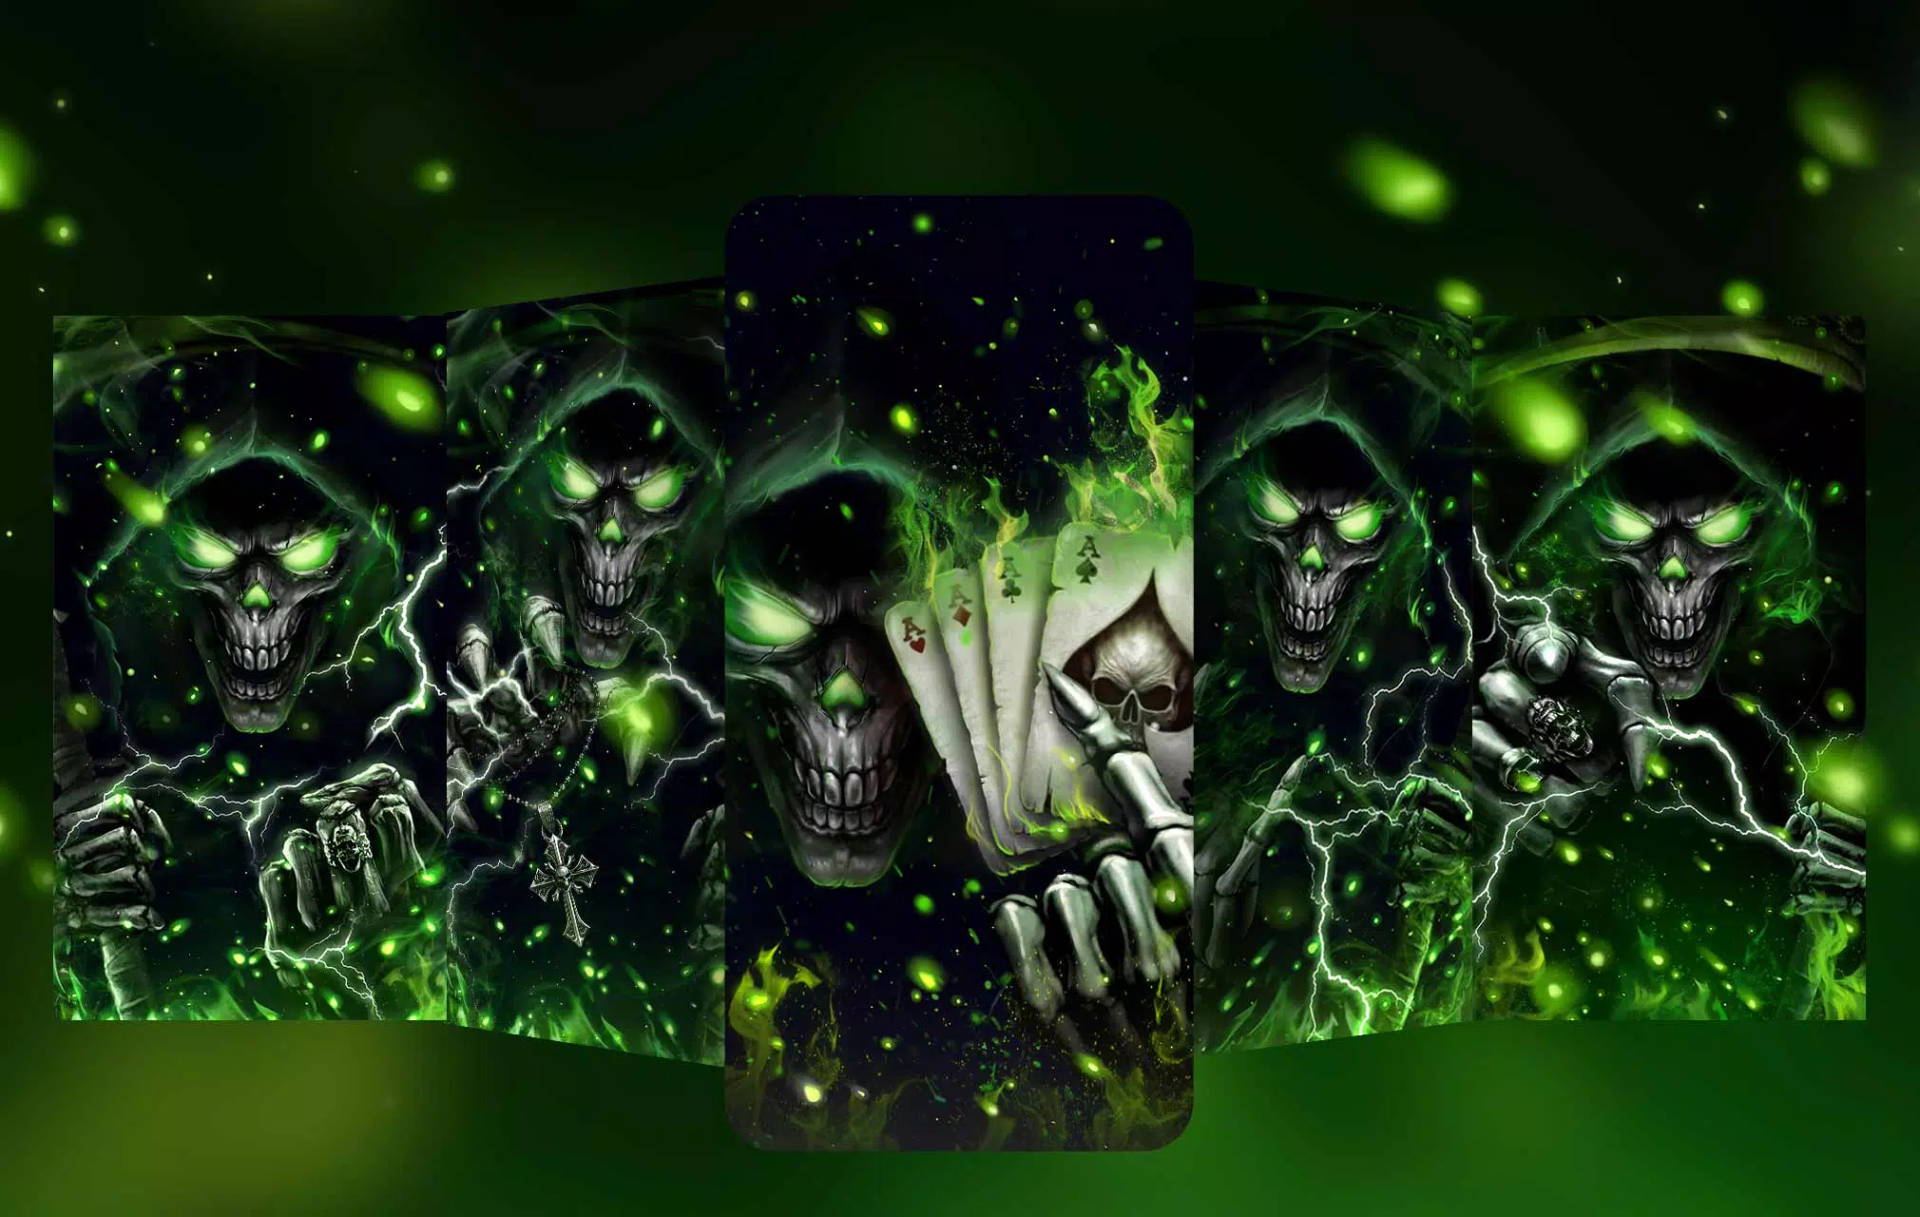 A Green Background With Skeletons On It Wallpaper